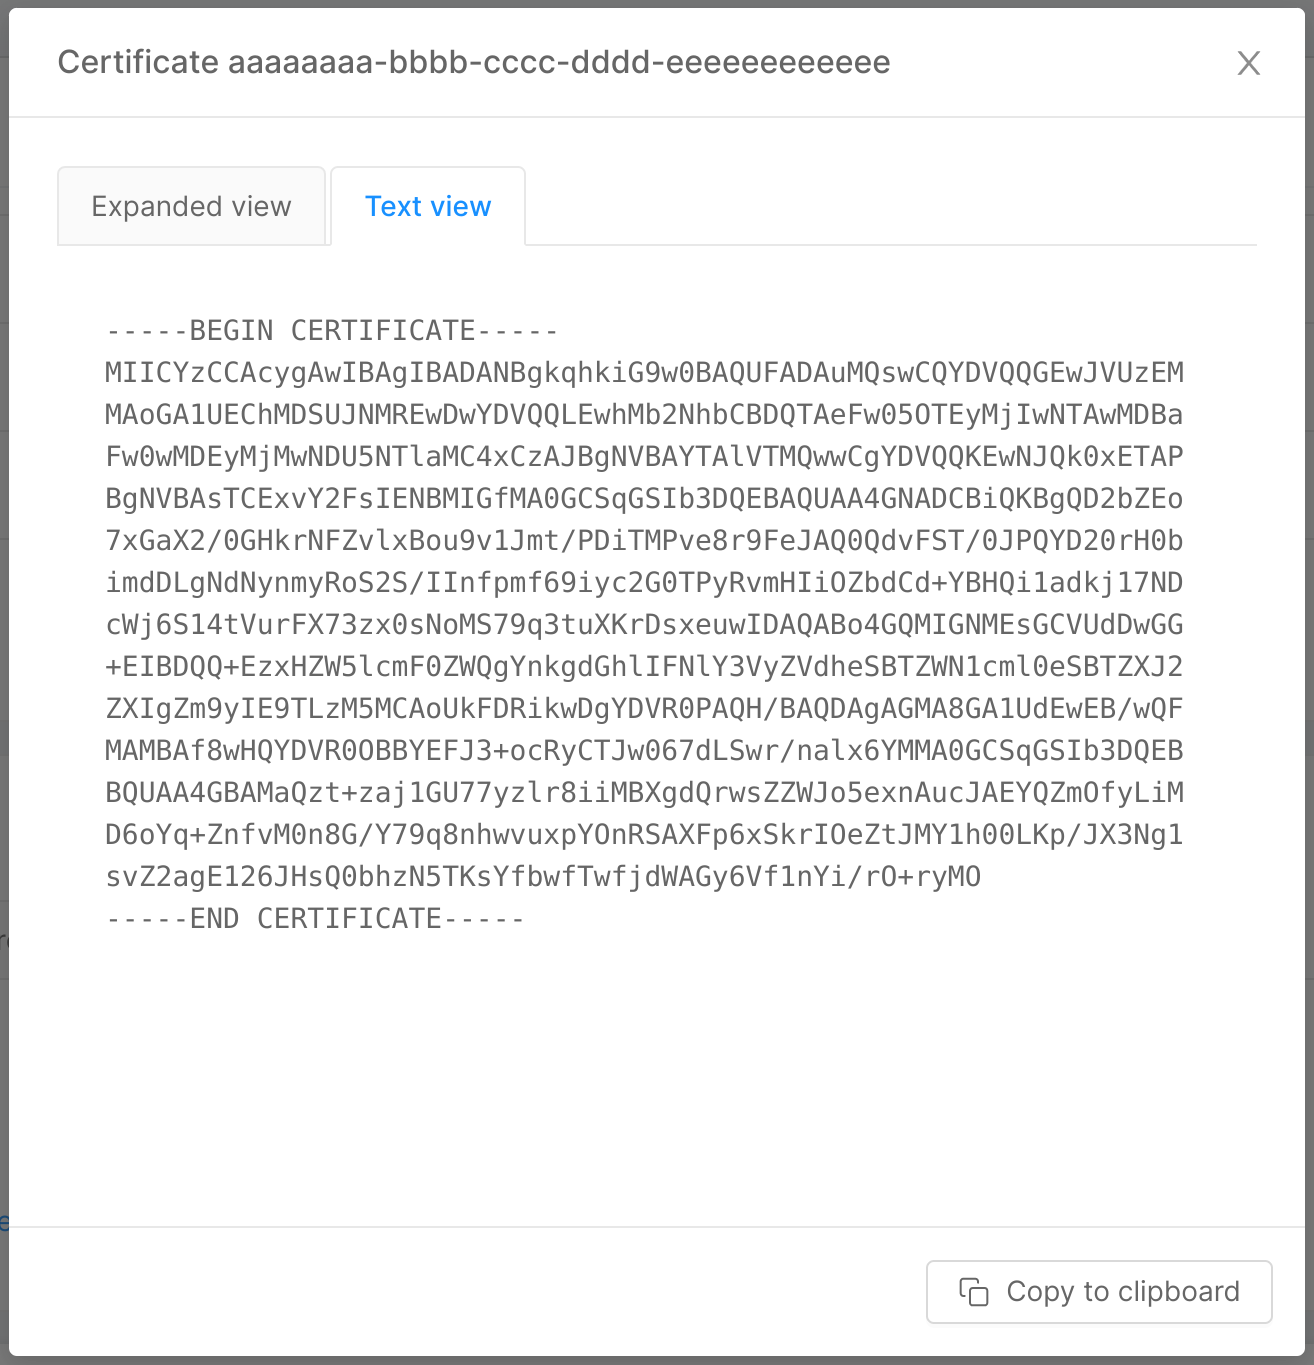 Certificate text view